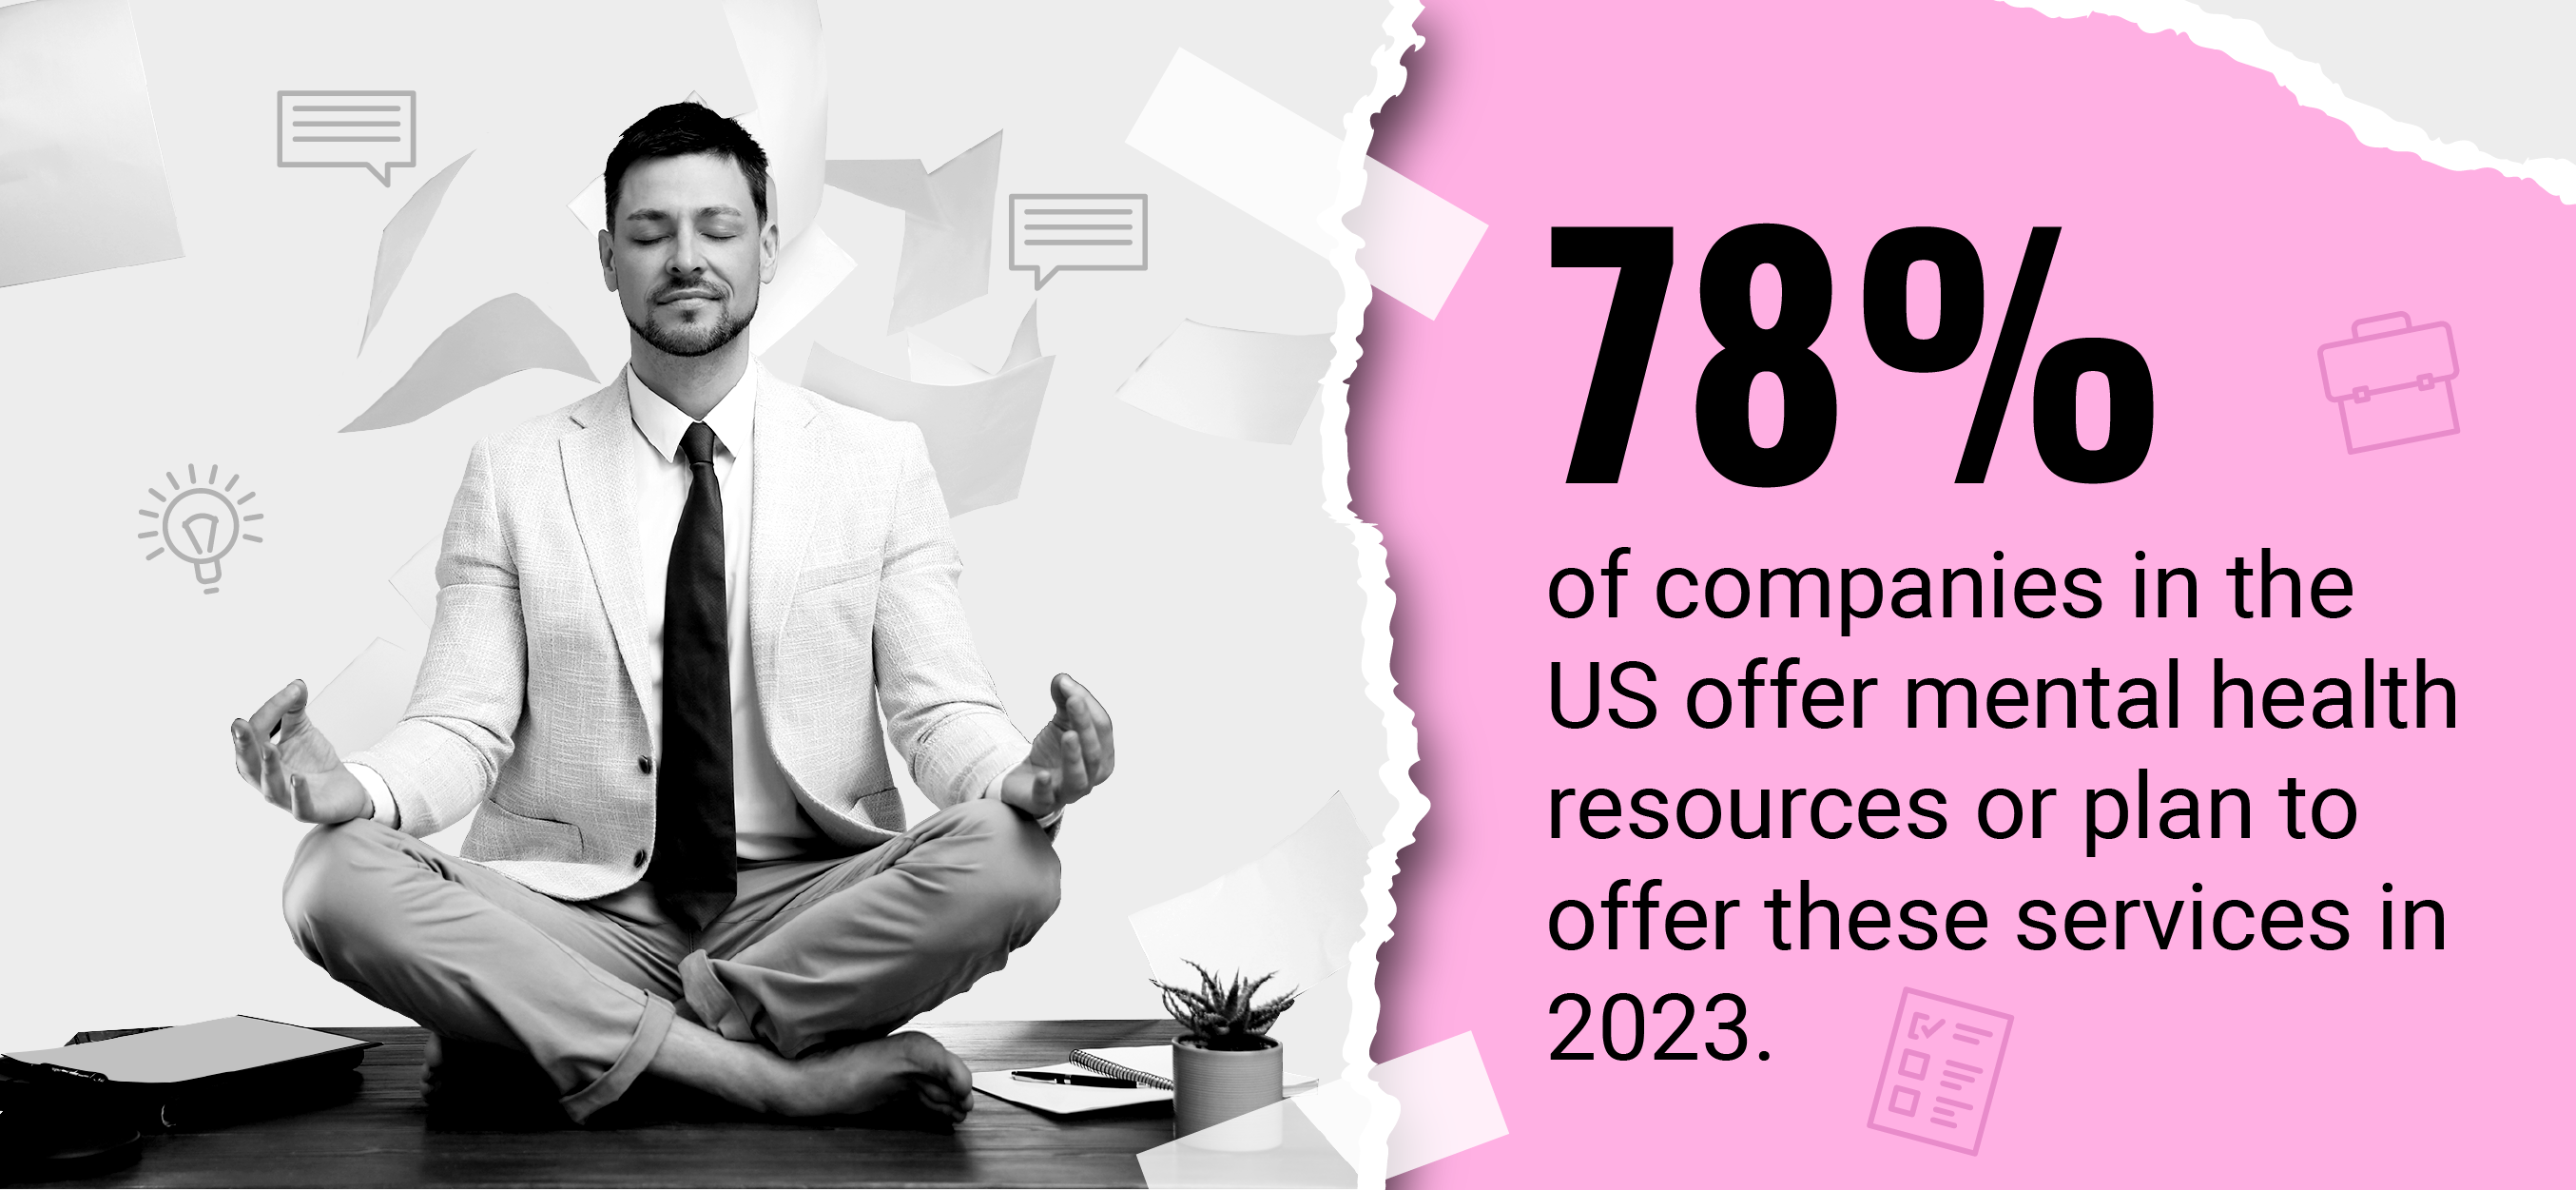 Call out text box saying 78% of US companies are offering mental health resources or planning to offer them in 2023.